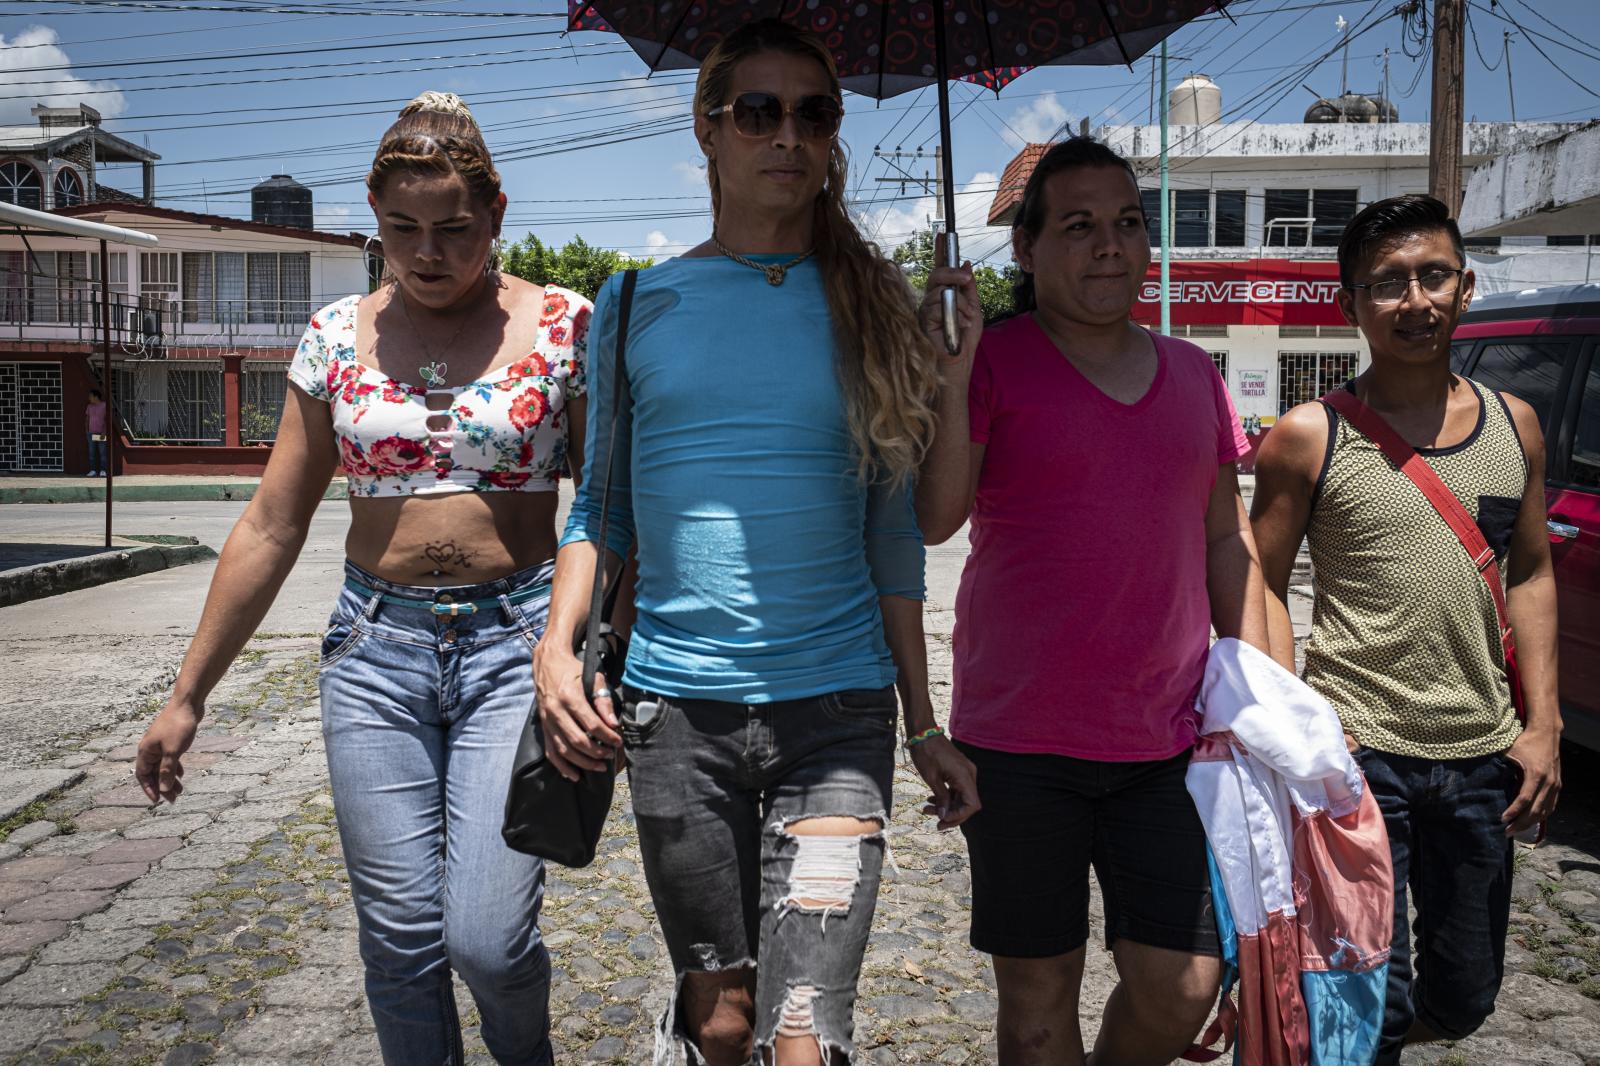 LGBTQ Migrants Find Community at Mexico's "House of Women"